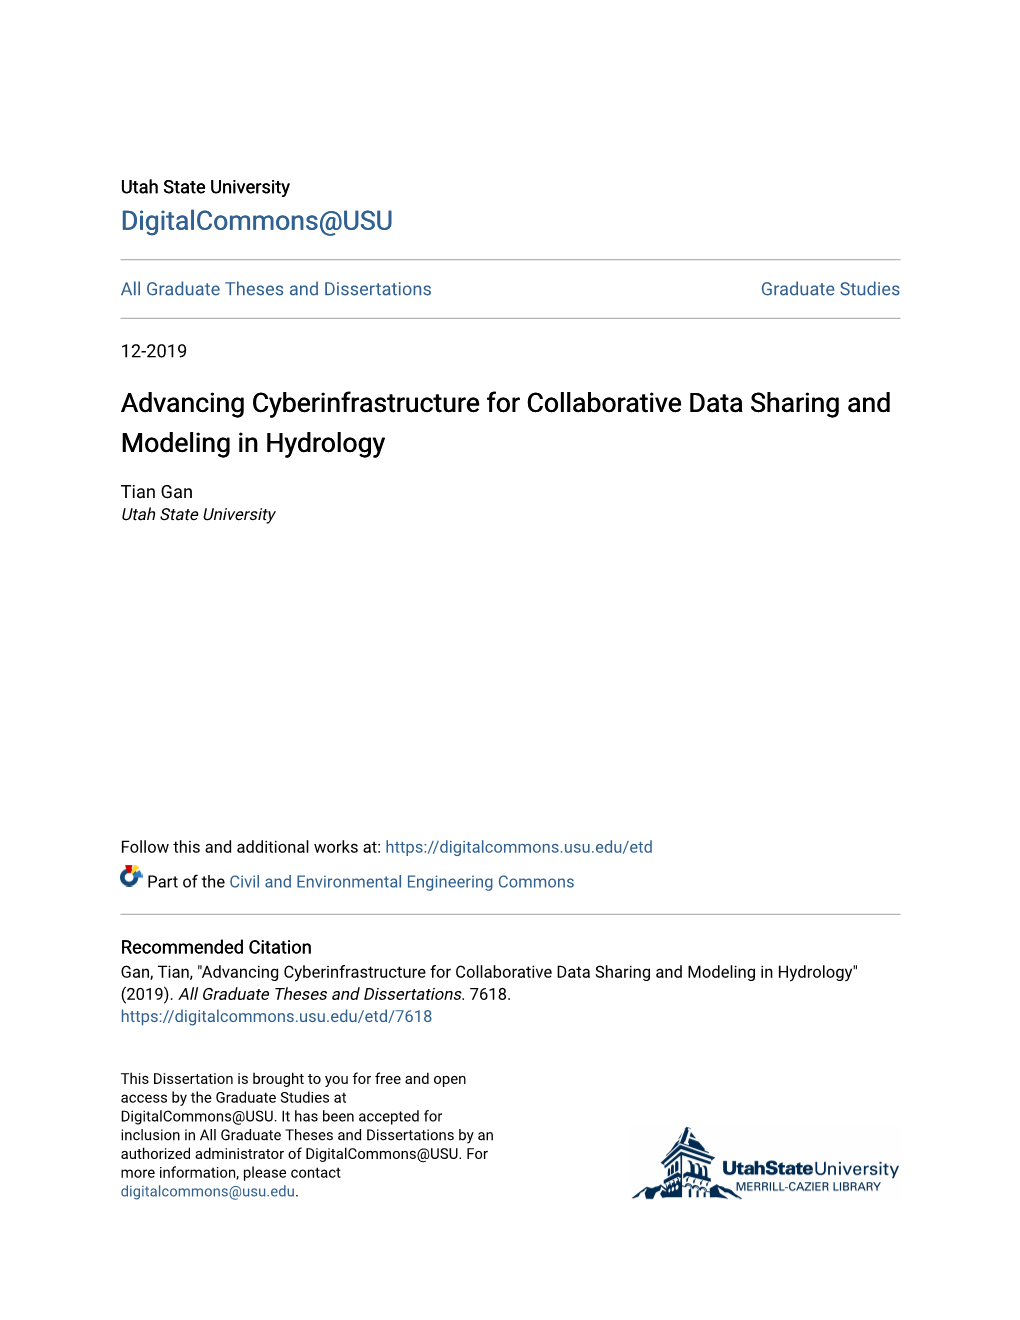 Advancing Cyberinfrastructure for Collaborative Data Sharing and Modeling in Hydrology